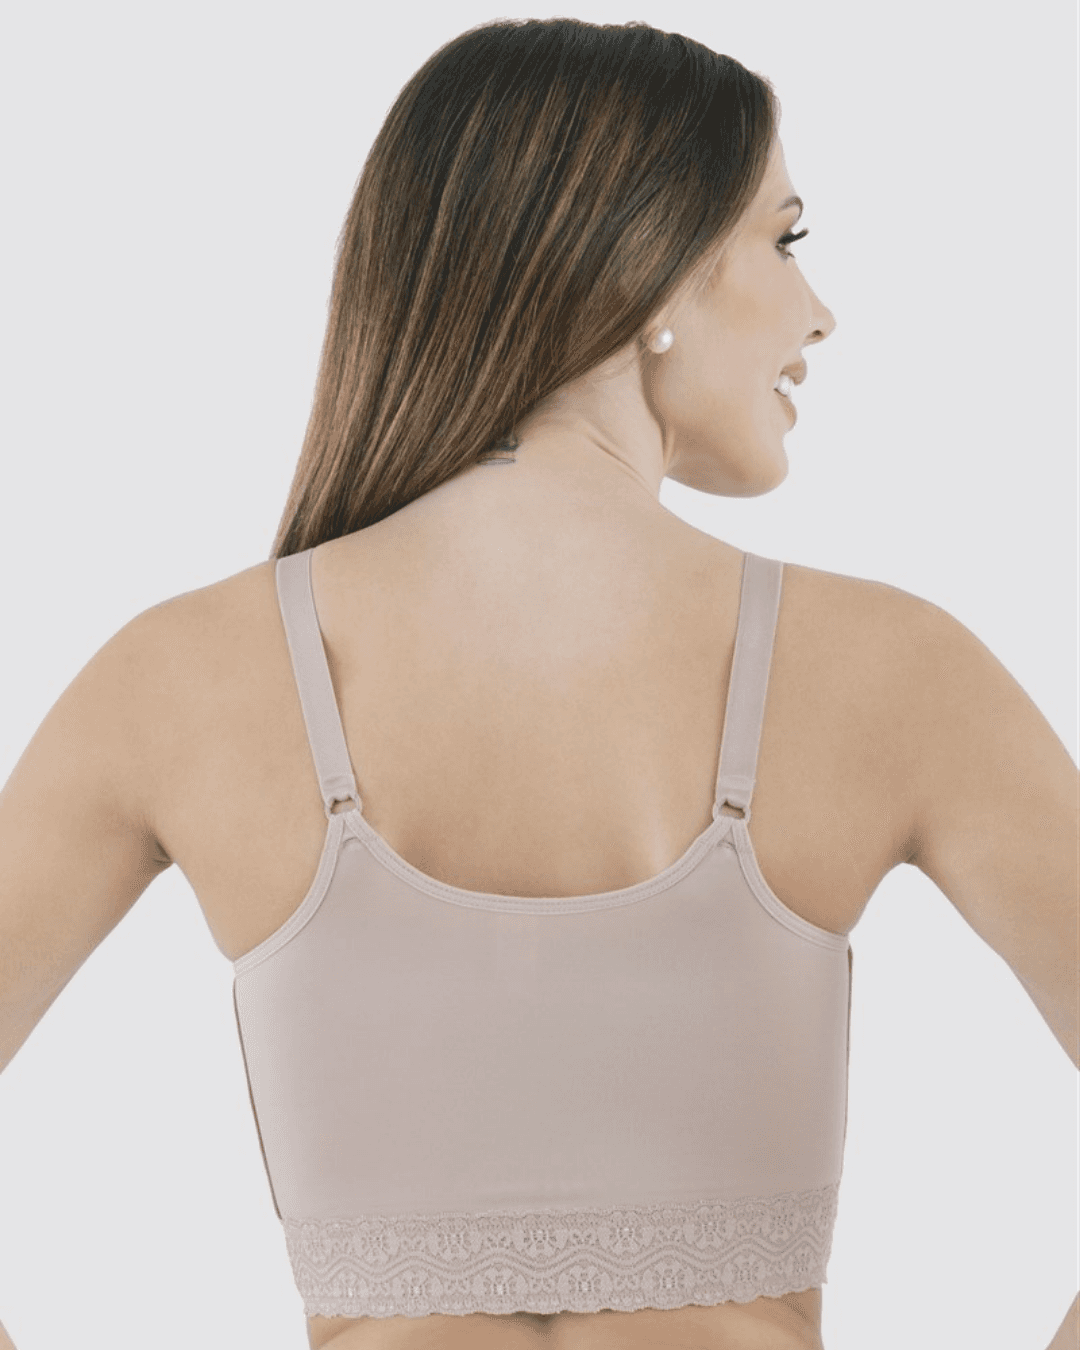 MACOM Medical - The macom® second stage bra has a lower cleavage and an  elastic band to give you extra support. It's recommended after 6 to 8 weeks  post surgery. . . . . #